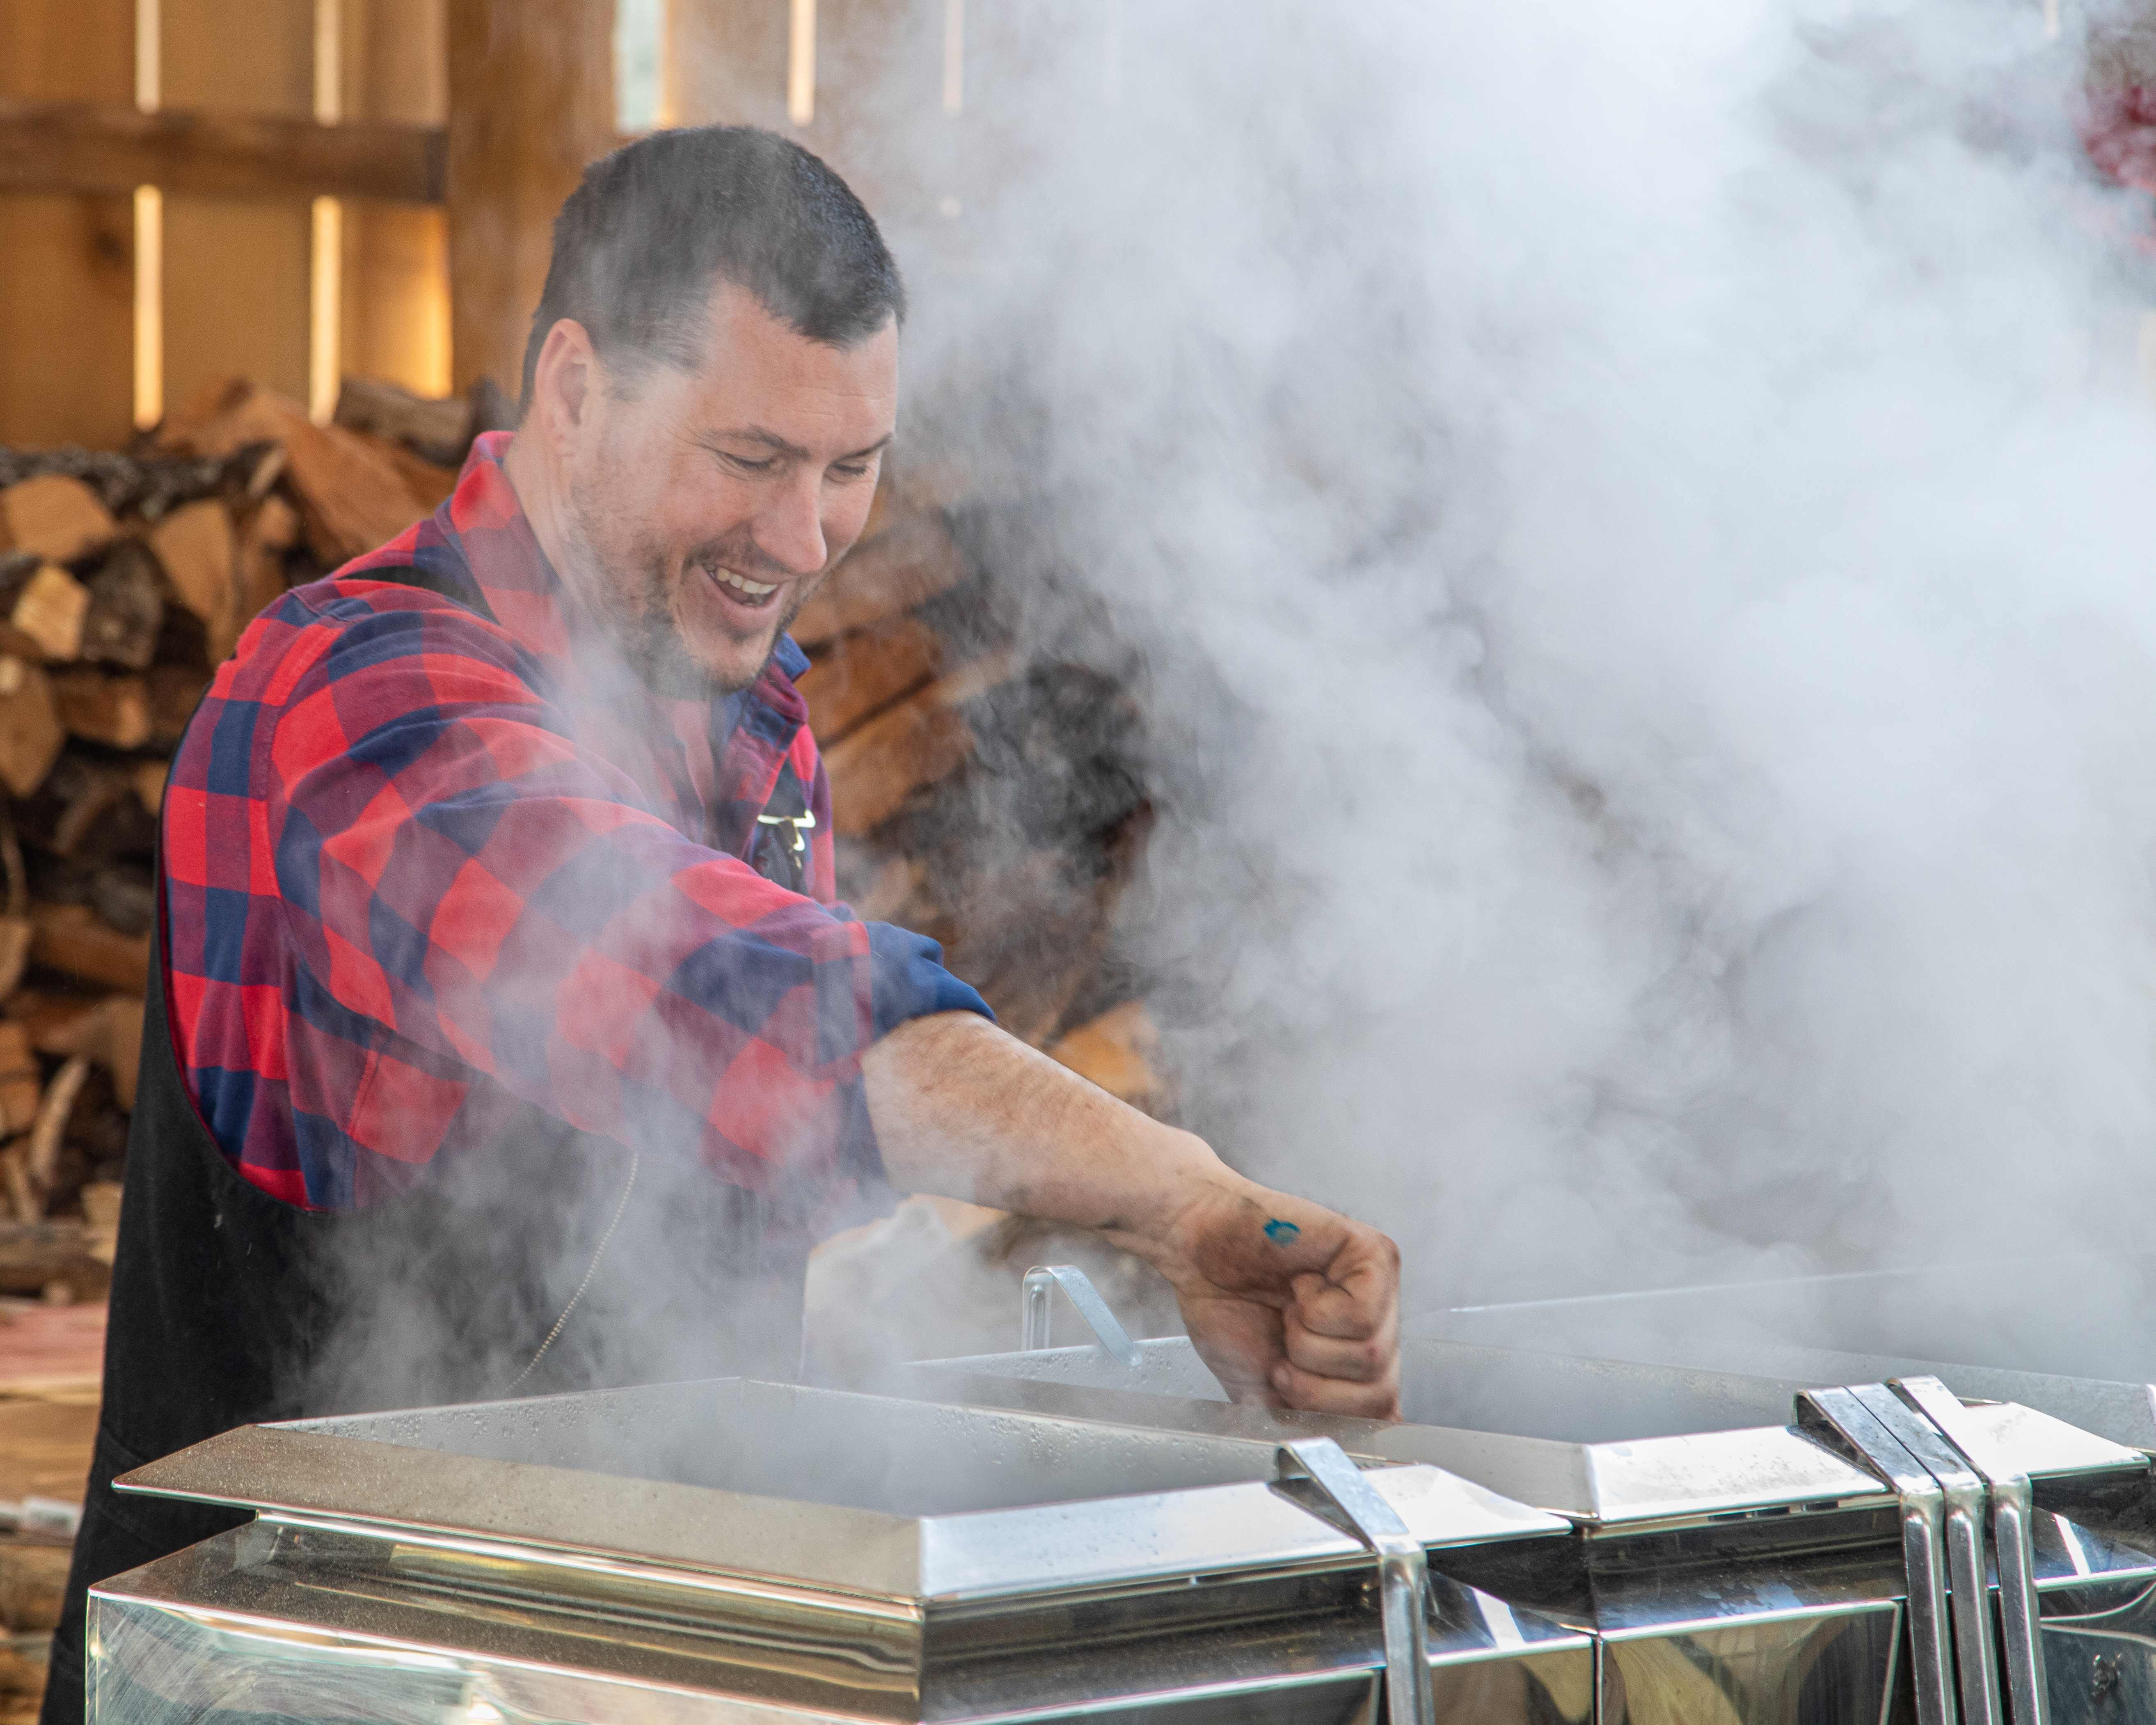 Shawn Hines of Hines East Fork Farm in Edmonton, demonstrates the maple syrup process at Kentucky Maple Day 2021. 